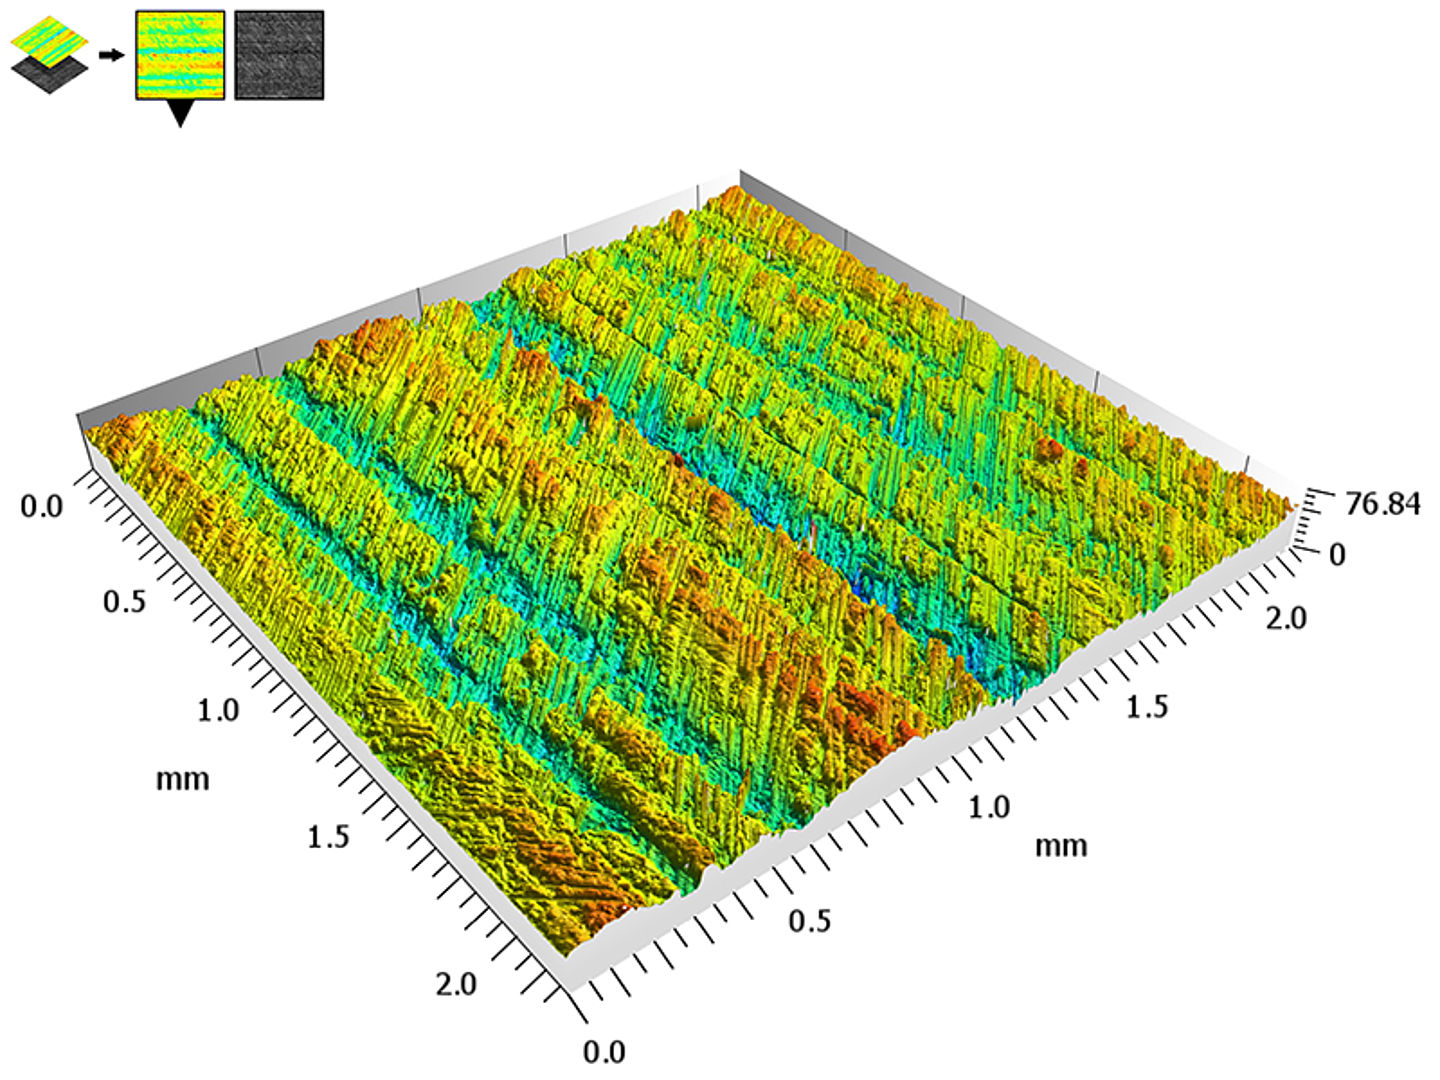 3D view of the surface